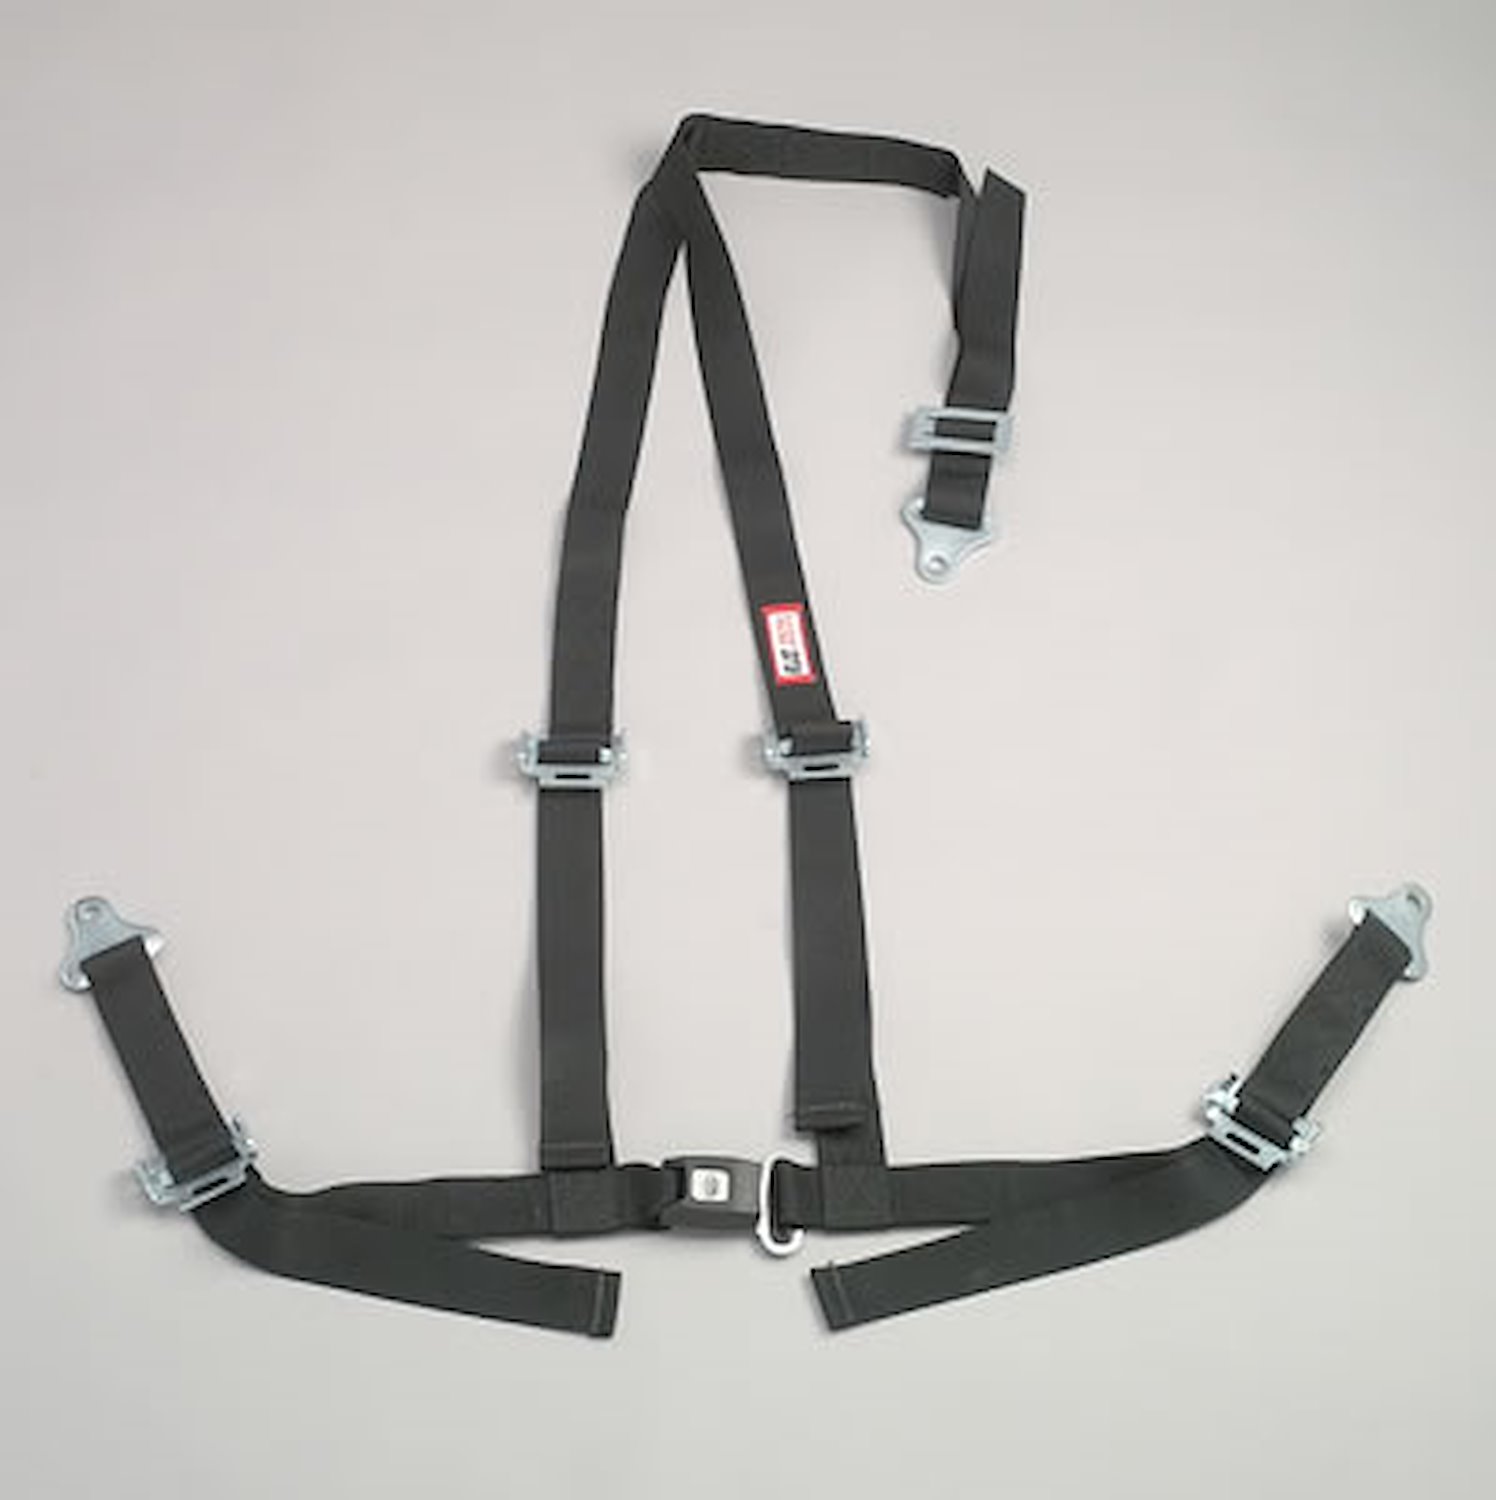 NON-SFI B&T HARNESS 2 PULL DOWN Lap Belt 2 S. H. Individual FLOOR Mount ALL WRAP ENDS w/STERNUM STRAP OD GREEN